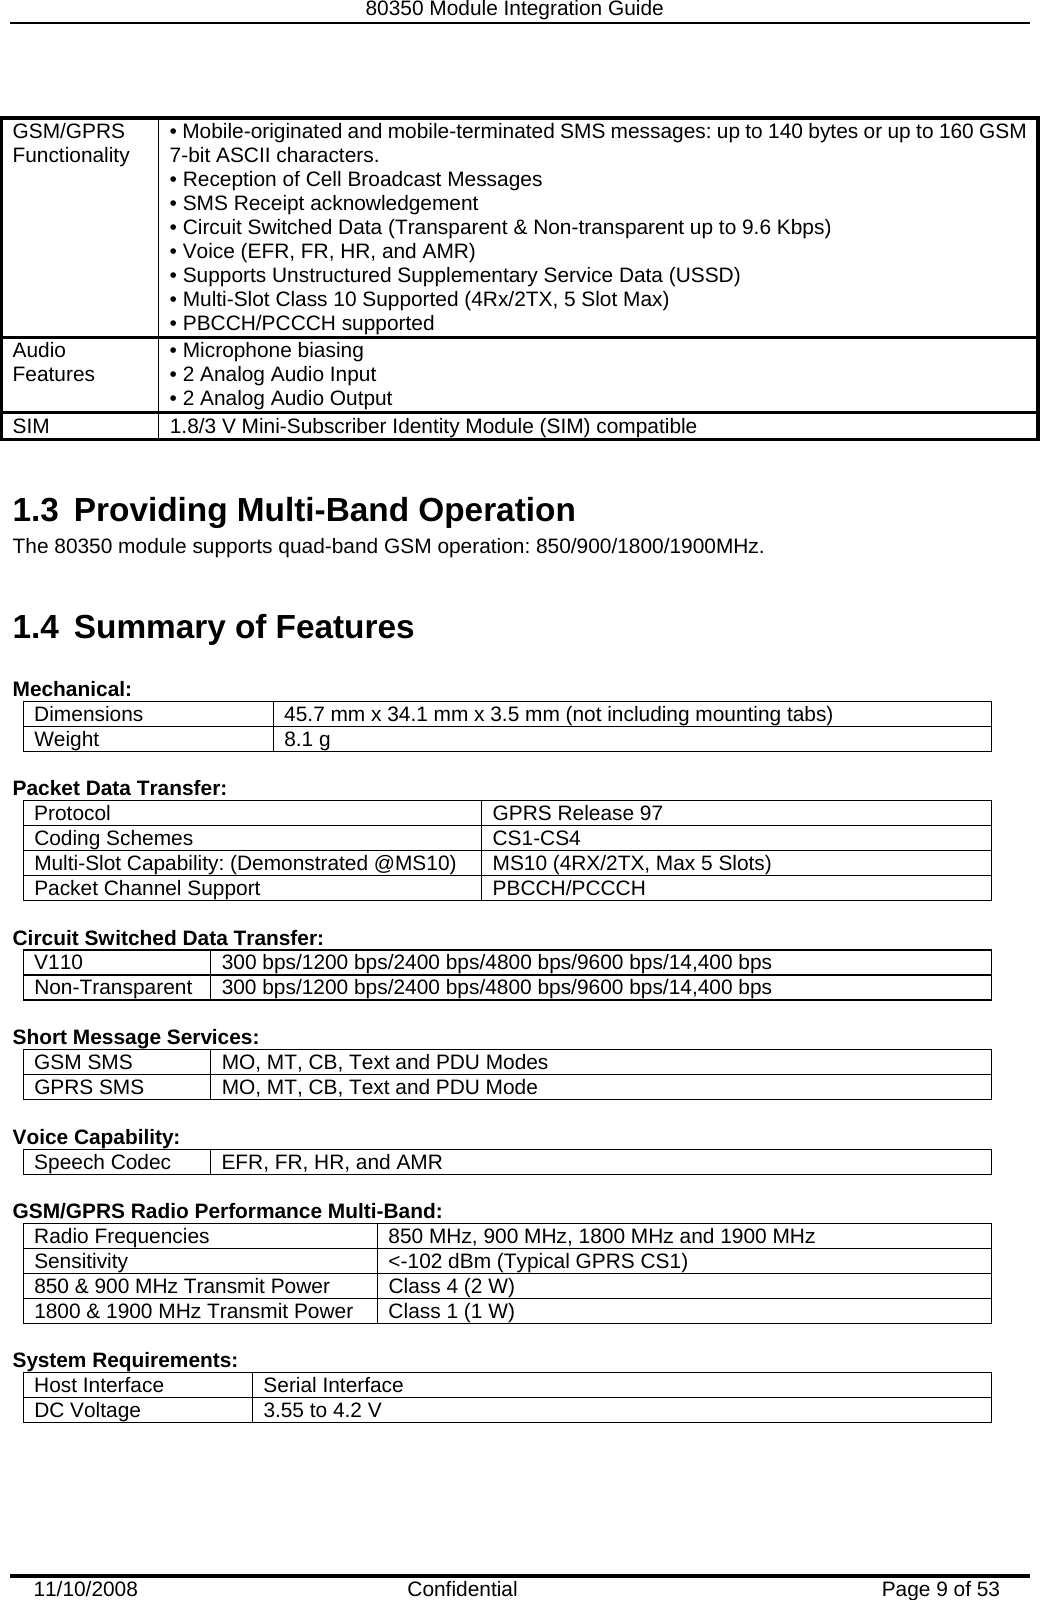   80350 Module Integration Guide  11/10/2008    Confidential  Page 9 of 53  GSM/GPRS Functionality  • Mobile-originated and mobile-terminated SMS messages: up to 140 bytes or up to 160 GSM 7-bit ASCII characters. • Reception of Cell Broadcast Messages  • SMS Receipt acknowledgement  • Circuit Switched Data (Transparent &amp; Non-transparent up to 9.6 Kbps)  • Voice (EFR, FR, HR, and AMR)  • Supports Unstructured Supplementary Service Data (USSD)  • Multi-Slot Class 10 Supported (4Rx/2TX, 5 Slot Max)  • PBCCH/PCCCH supported  Audio Features  • Microphone biasing  • 2 Analog Audio Input  • 2 Analog Audio Output SIM  1.8/3 V Mini-Subscriber Identity Module (SIM) compatible  1.3  Providing Multi-Band Operation The 80350 module supports quad-band GSM operation: 850/900/1800/1900MHz.  1.4  Summary of Features  Mechanical: Dimensions 45.7 mm x 34.1 mm x 3.5 mm (not including mounting tabs) Weight 8.1 g  Packet Data Transfer: Protocol  GPRS Release 97 Coding Schemes CS1-CS4 Multi-Slot Capability: (Demonstrated @MS10) MS10 (4RX/2TX, Max 5 Slots) Packet Channel Support PBCCH/PCCCH  Circuit Switched Data Transfer: V110  300 bps/1200 bps/2400 bps/4800 bps/9600 bps/14,400 bps Non-Transparent 300 bps/1200 bps/2400 bps/4800 bps/9600 bps/14,400 bps  Short Message Services: GSM SMS  MO, MT, CB, Text and PDU Modes GPRS SMS MO, MT, CB, Text and PDU Mode  Voice Capability: Speech Codec  EFR, FR, HR, and AMR  GSM/GPRS Radio Performance Multi-Band: Radio Frequencies  850 MHz, 900 MHz, 1800 MHz and 1900 MHz Sensitivity &lt;-102 dBm (Typical GPRS CS1) 850 &amp; 900 MHz Transmit Power Class 4 (2 W) 1800 &amp; 1900 MHz Transmit Power Class 1 (1 W)  System Requirements: Host Interface Serial Interface DC Voltage 3.55 to 4.2 V  